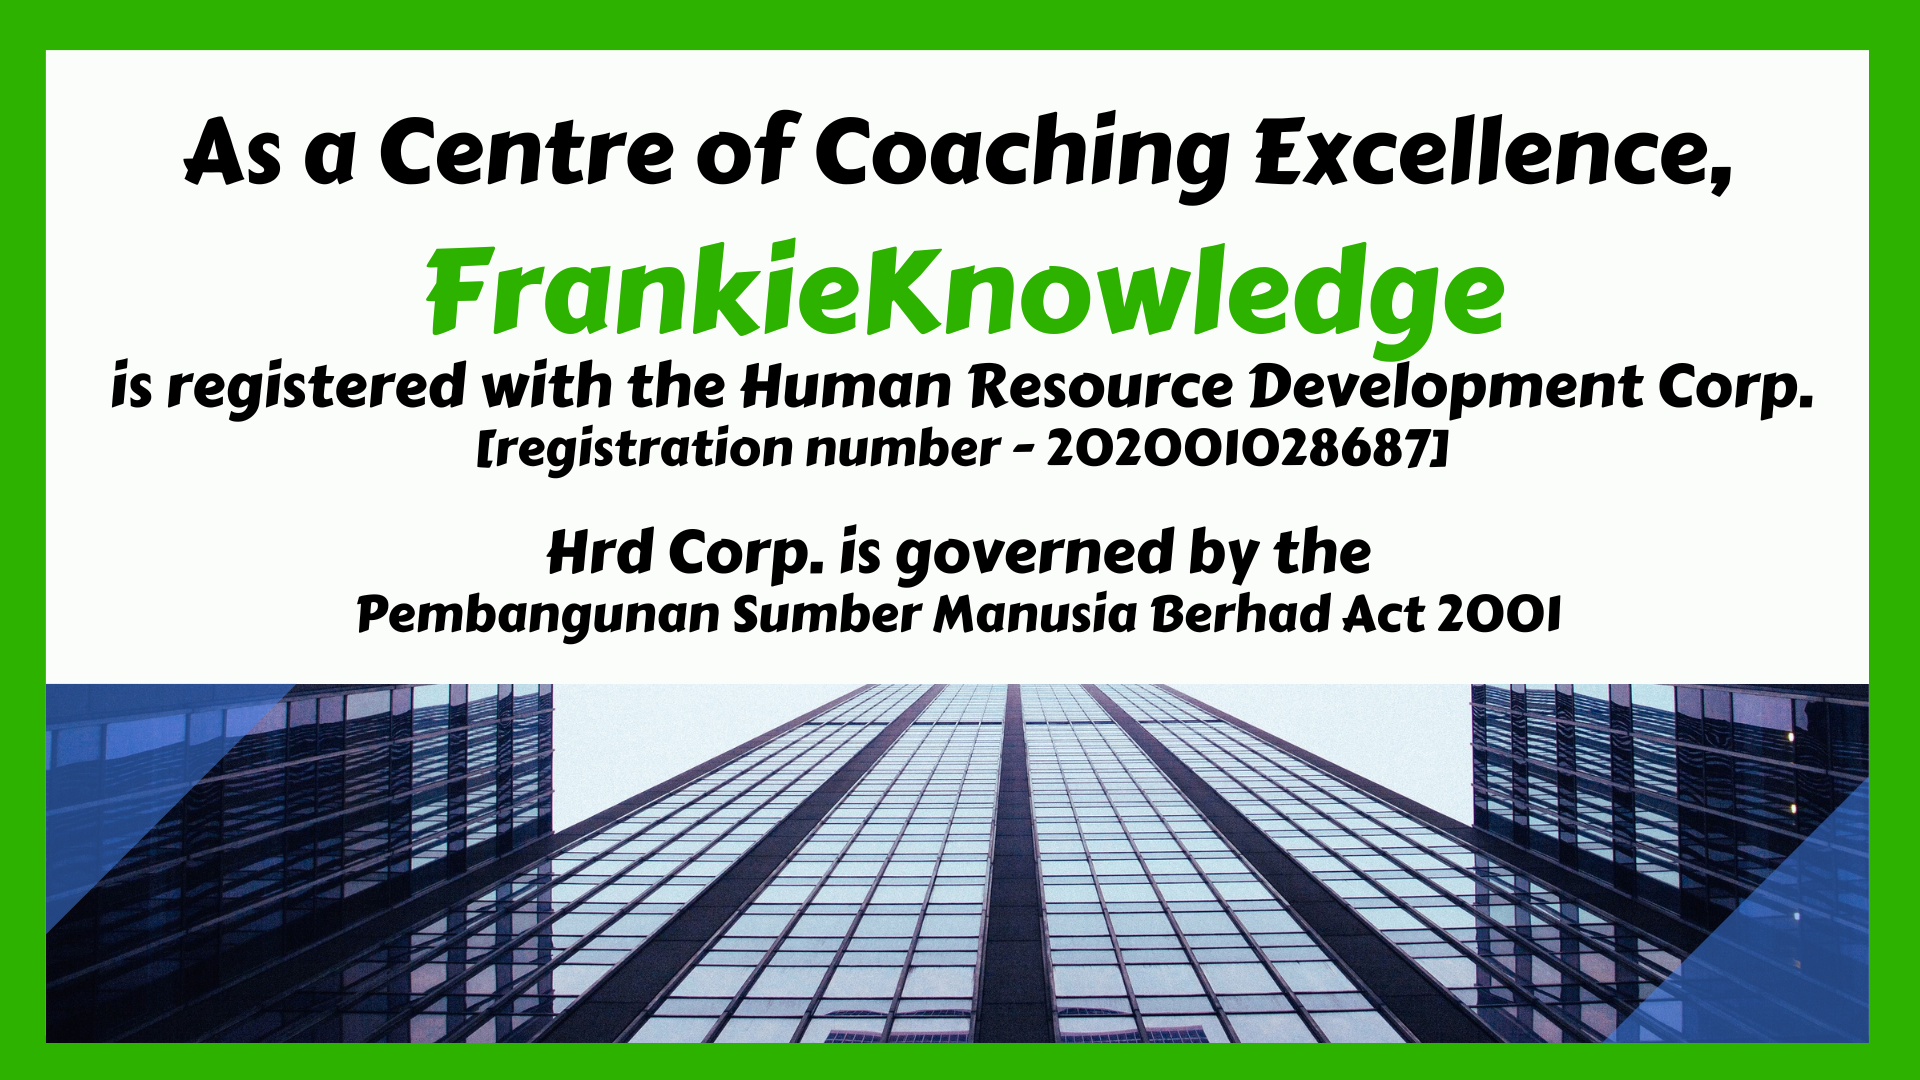 FrankieKnowledge is Coaching Centre of Excellence for Malaysia Madani